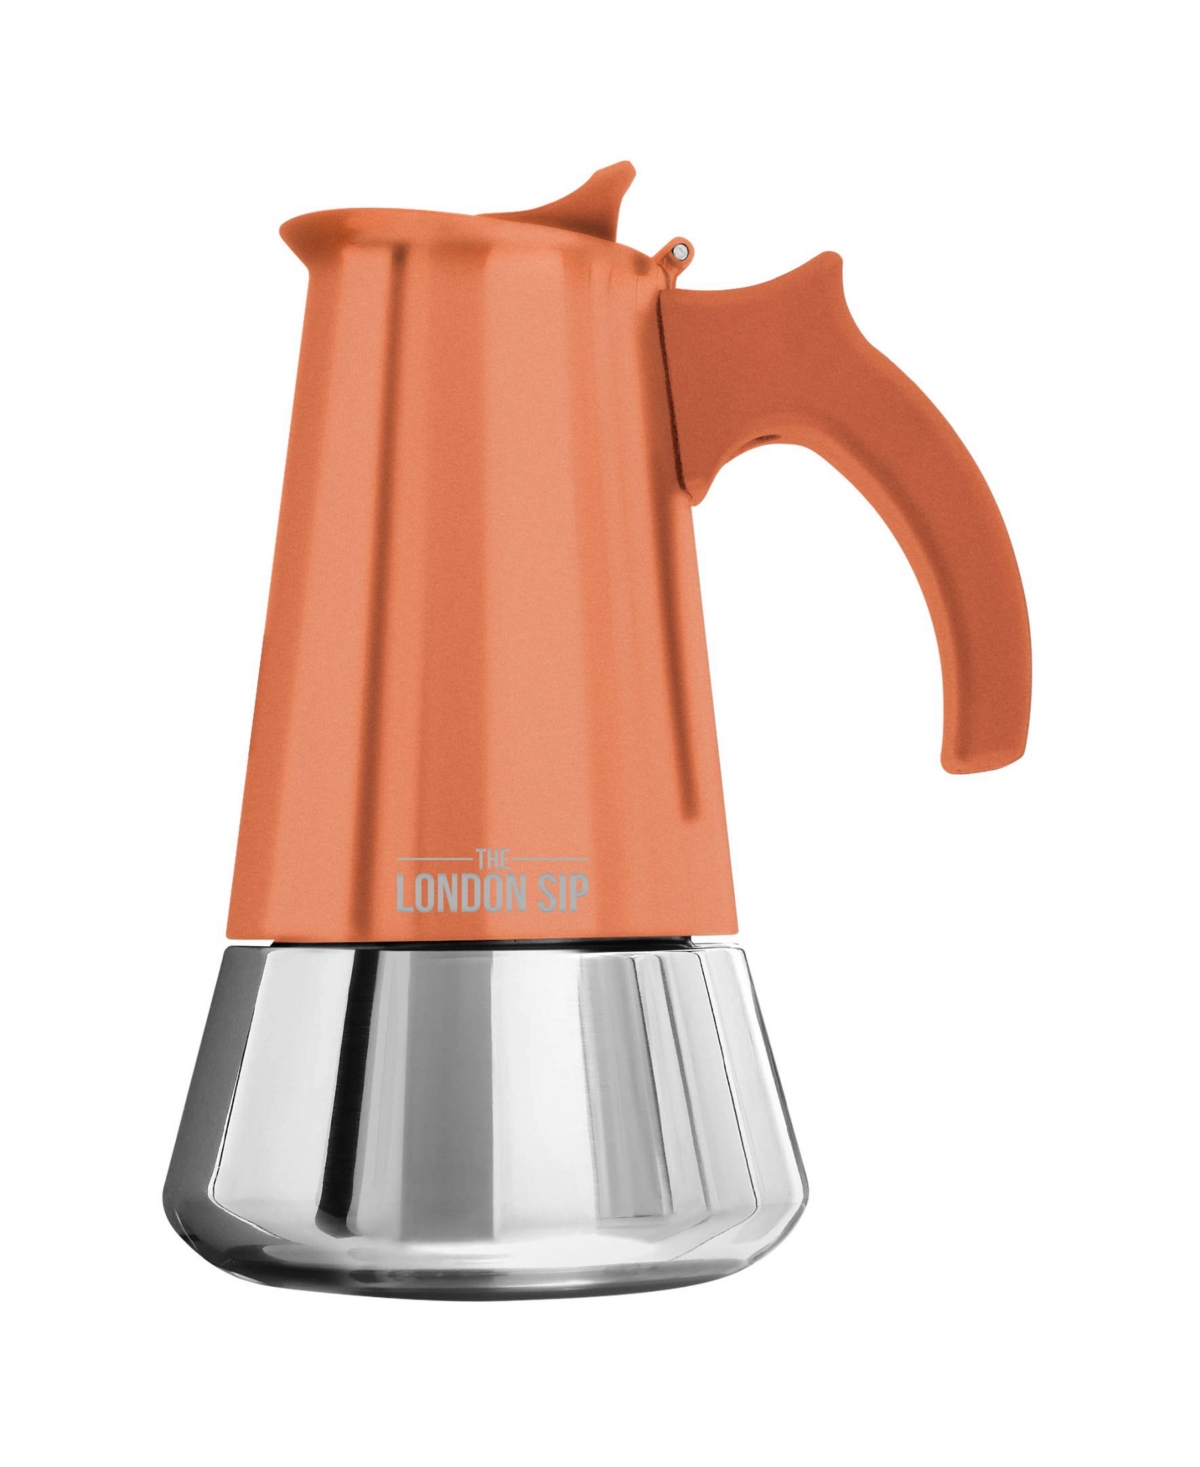 London Sip Stainless Steel Coffee Maker 3-cup In Copper